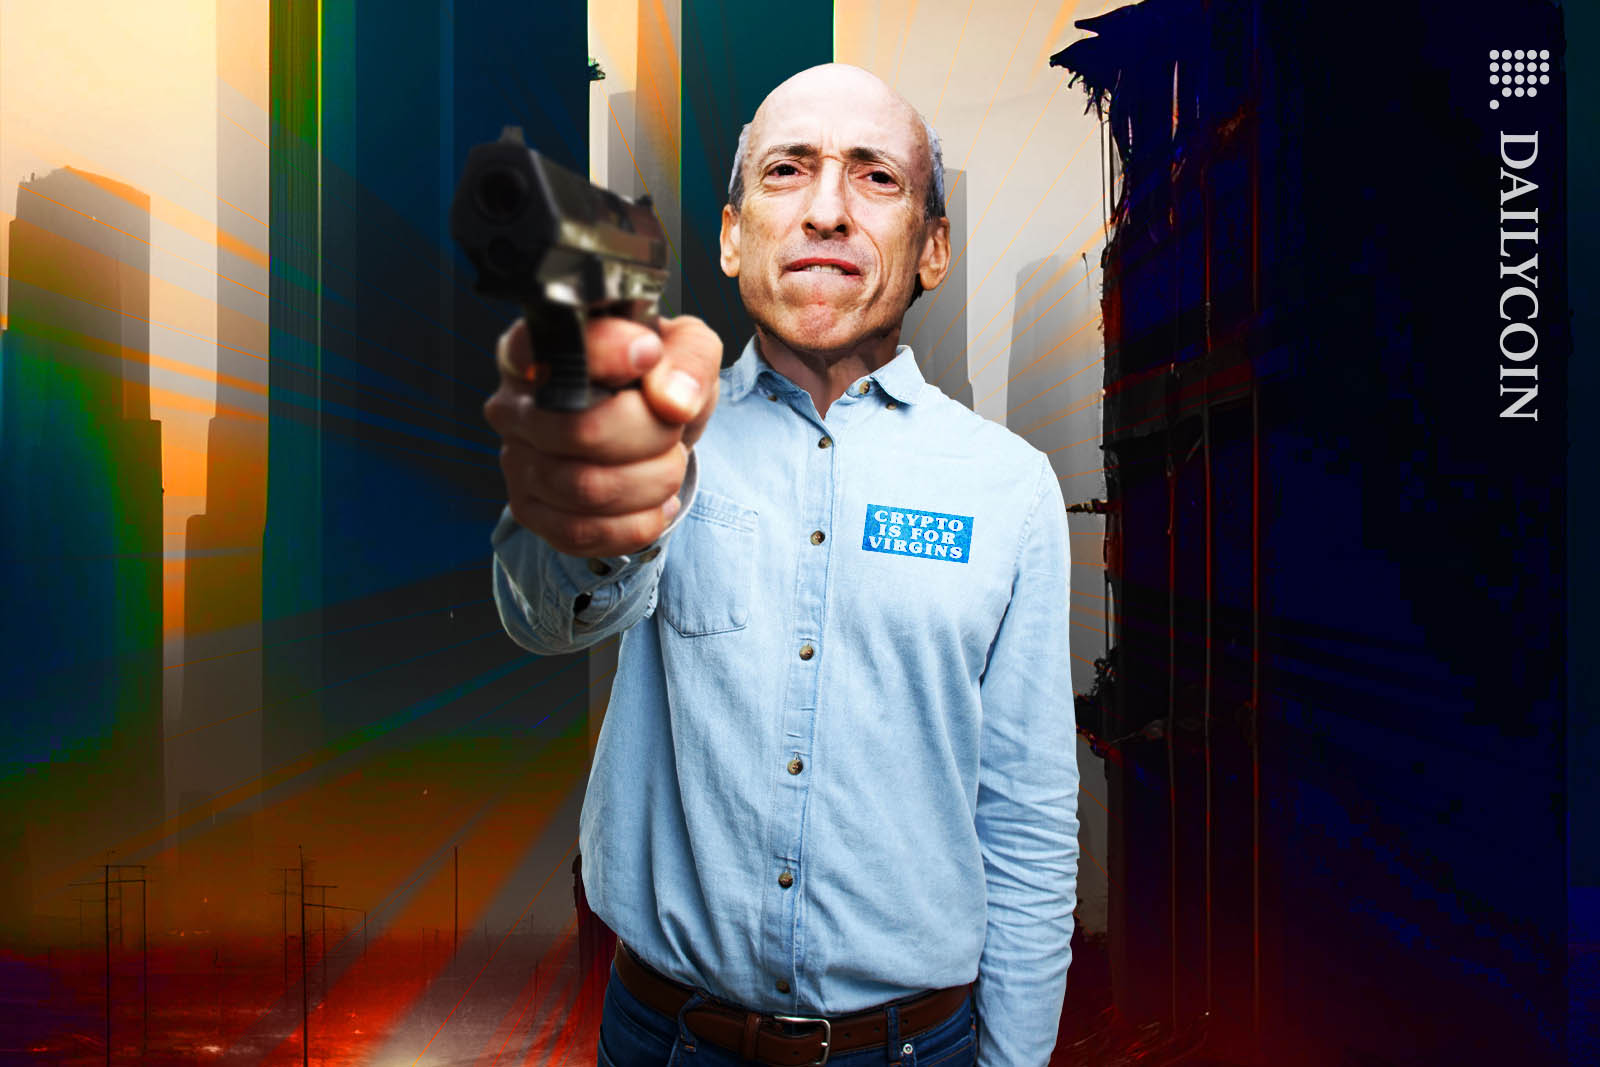 Gery Gensler holding a gun towards the camera, looking like he is about to finish crypto.